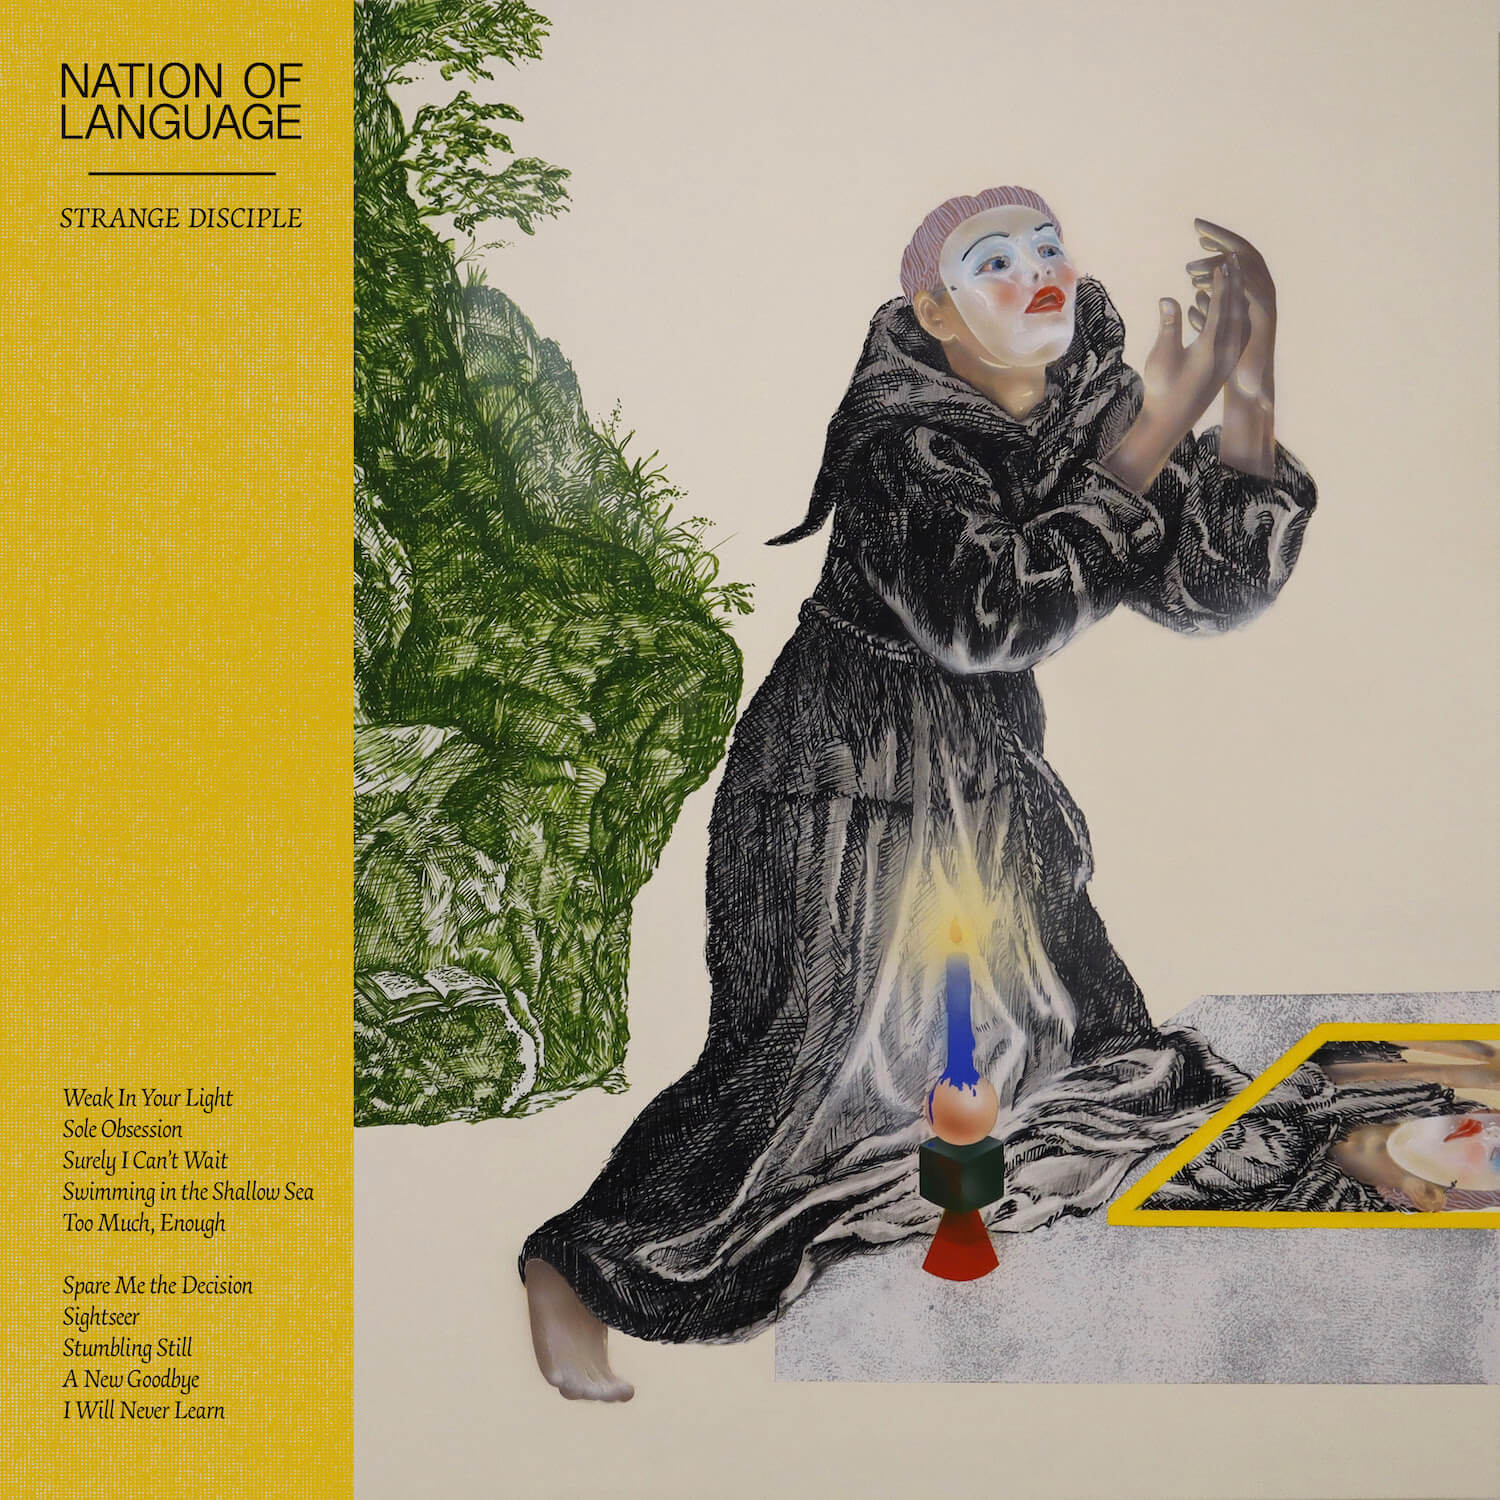 Strange Disciple by Nation of Language album review by Adam Fink for Northern Transmissions. The trio's full-length drops on 9/15 via PIAS